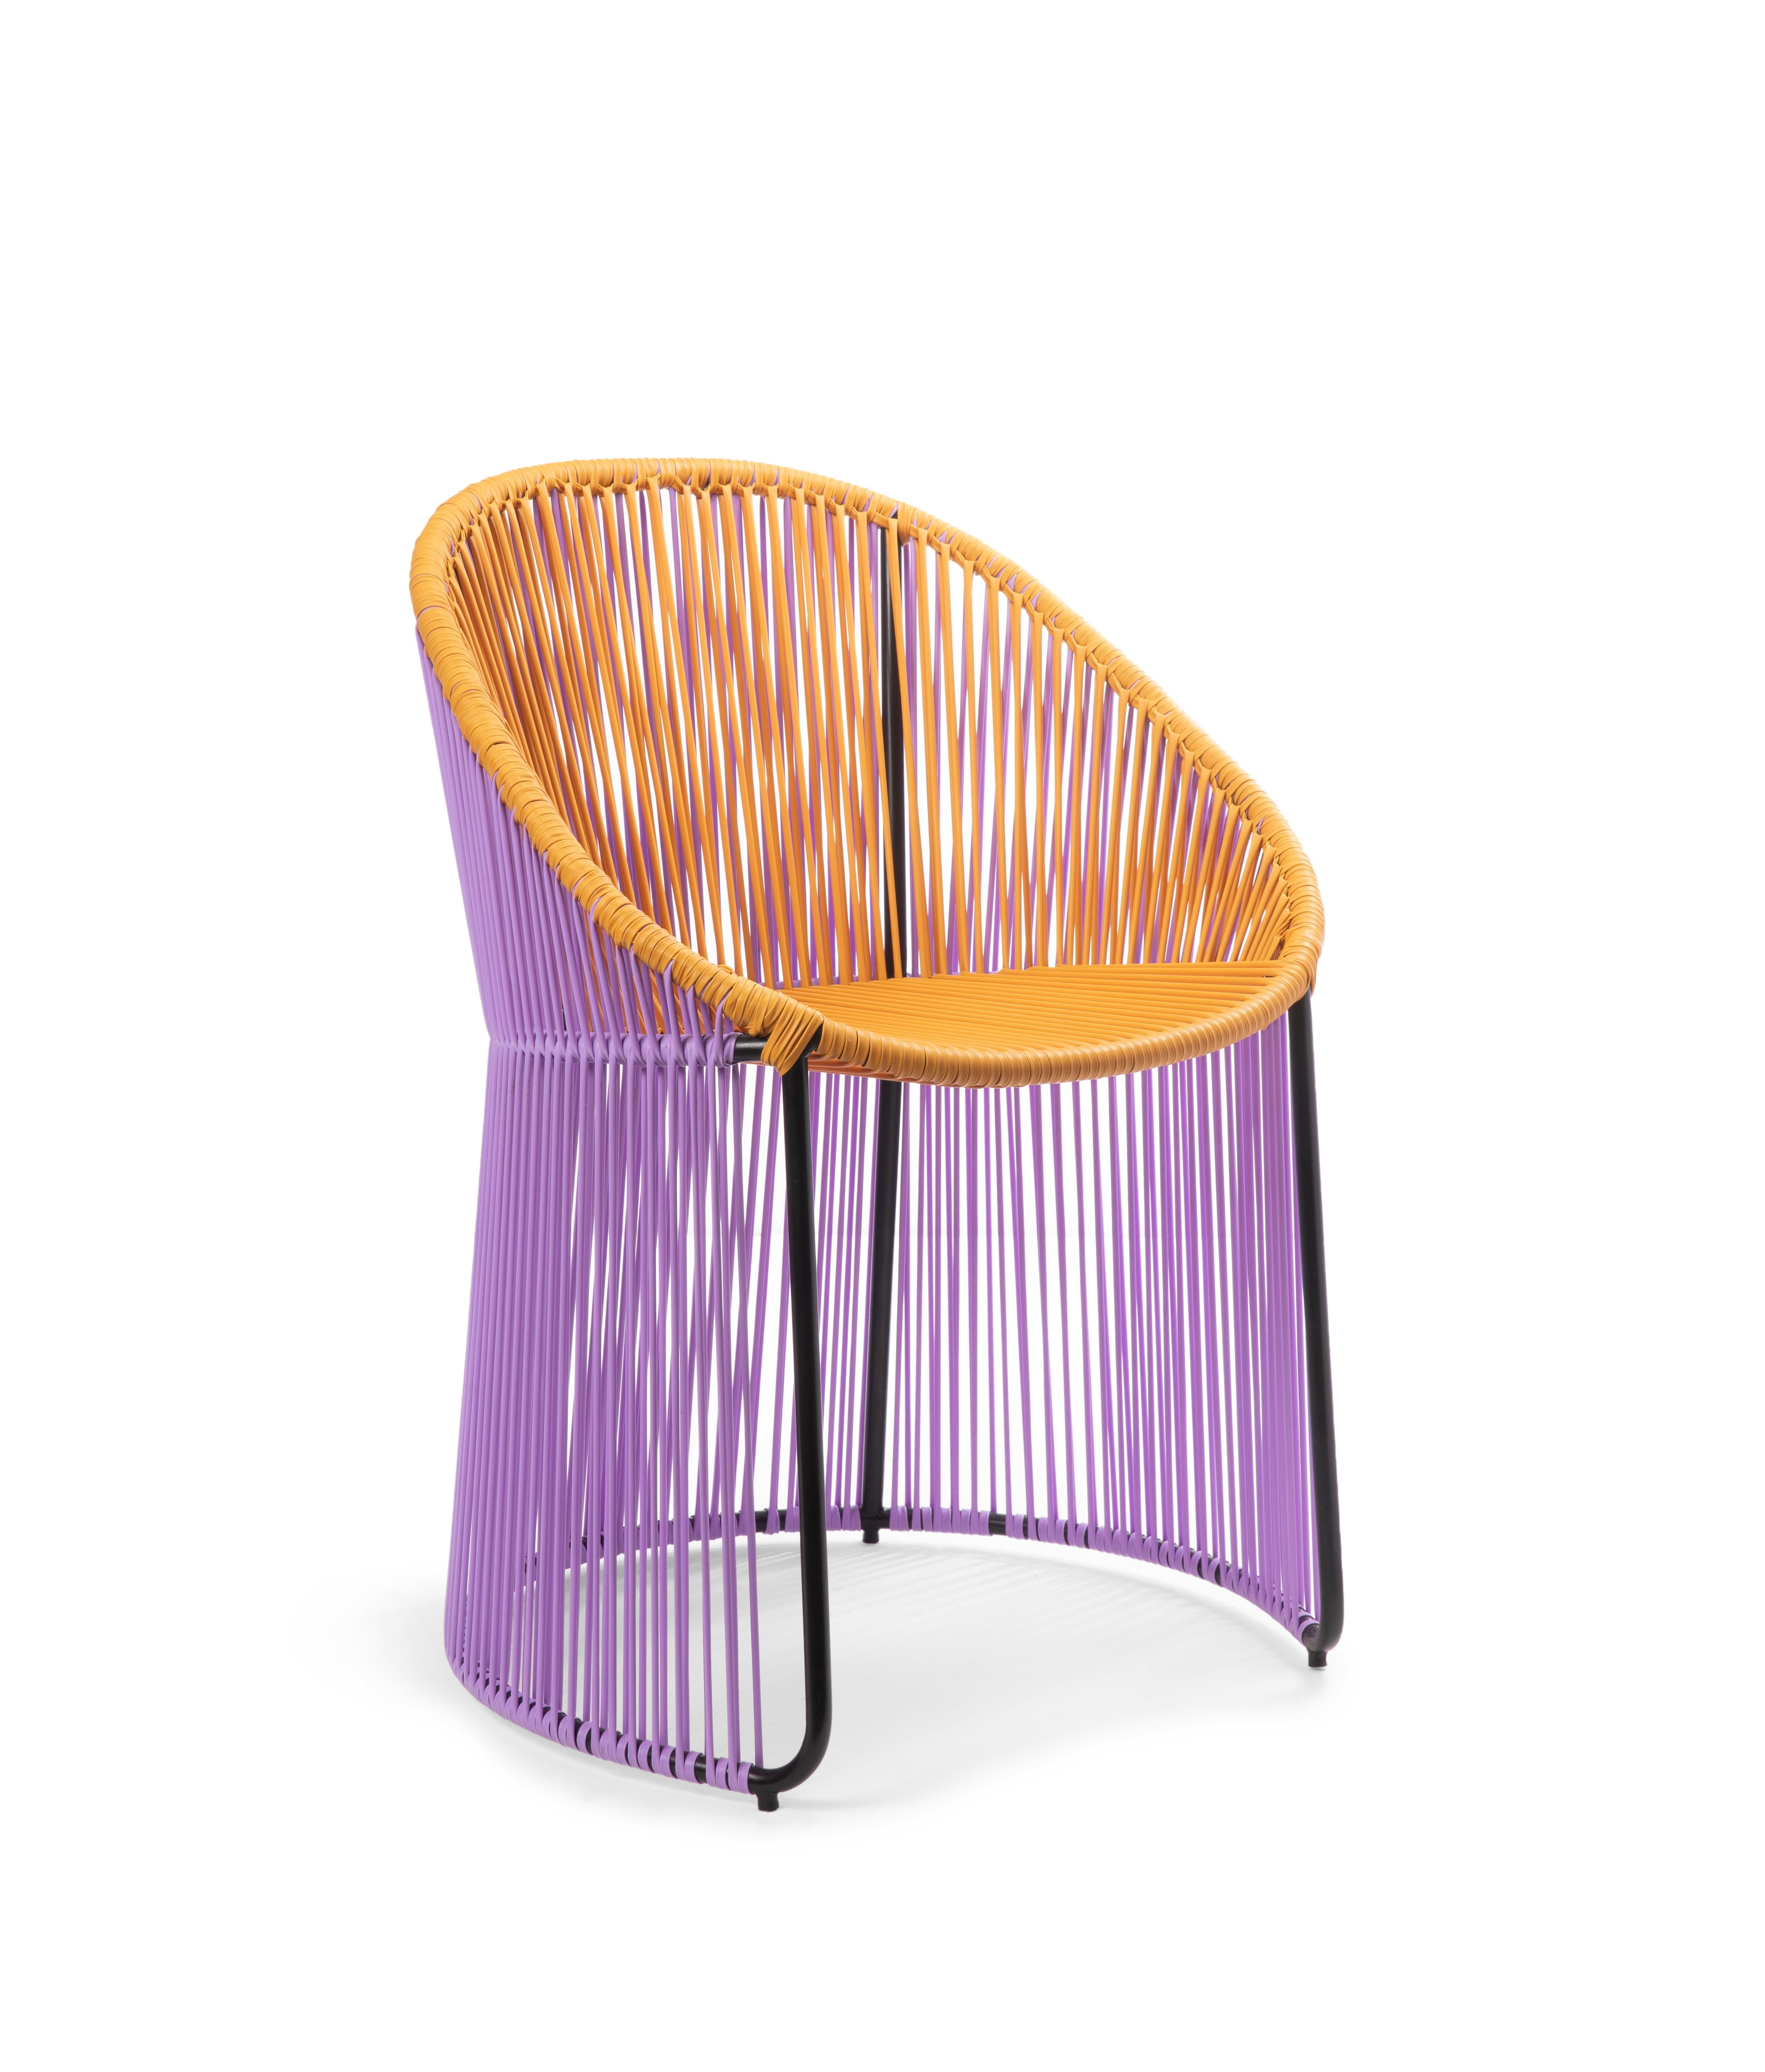 Set of 4 Honey/Lila Cartagenas dining chair by Sebastian Herkner.
Materials: PVC strings. Galvanized and powder-coated tubular steel frame
Technique: made from recycled plastic. Weaved by local craftspeople in Colombia. 
Dimensions: W 60.2 x D